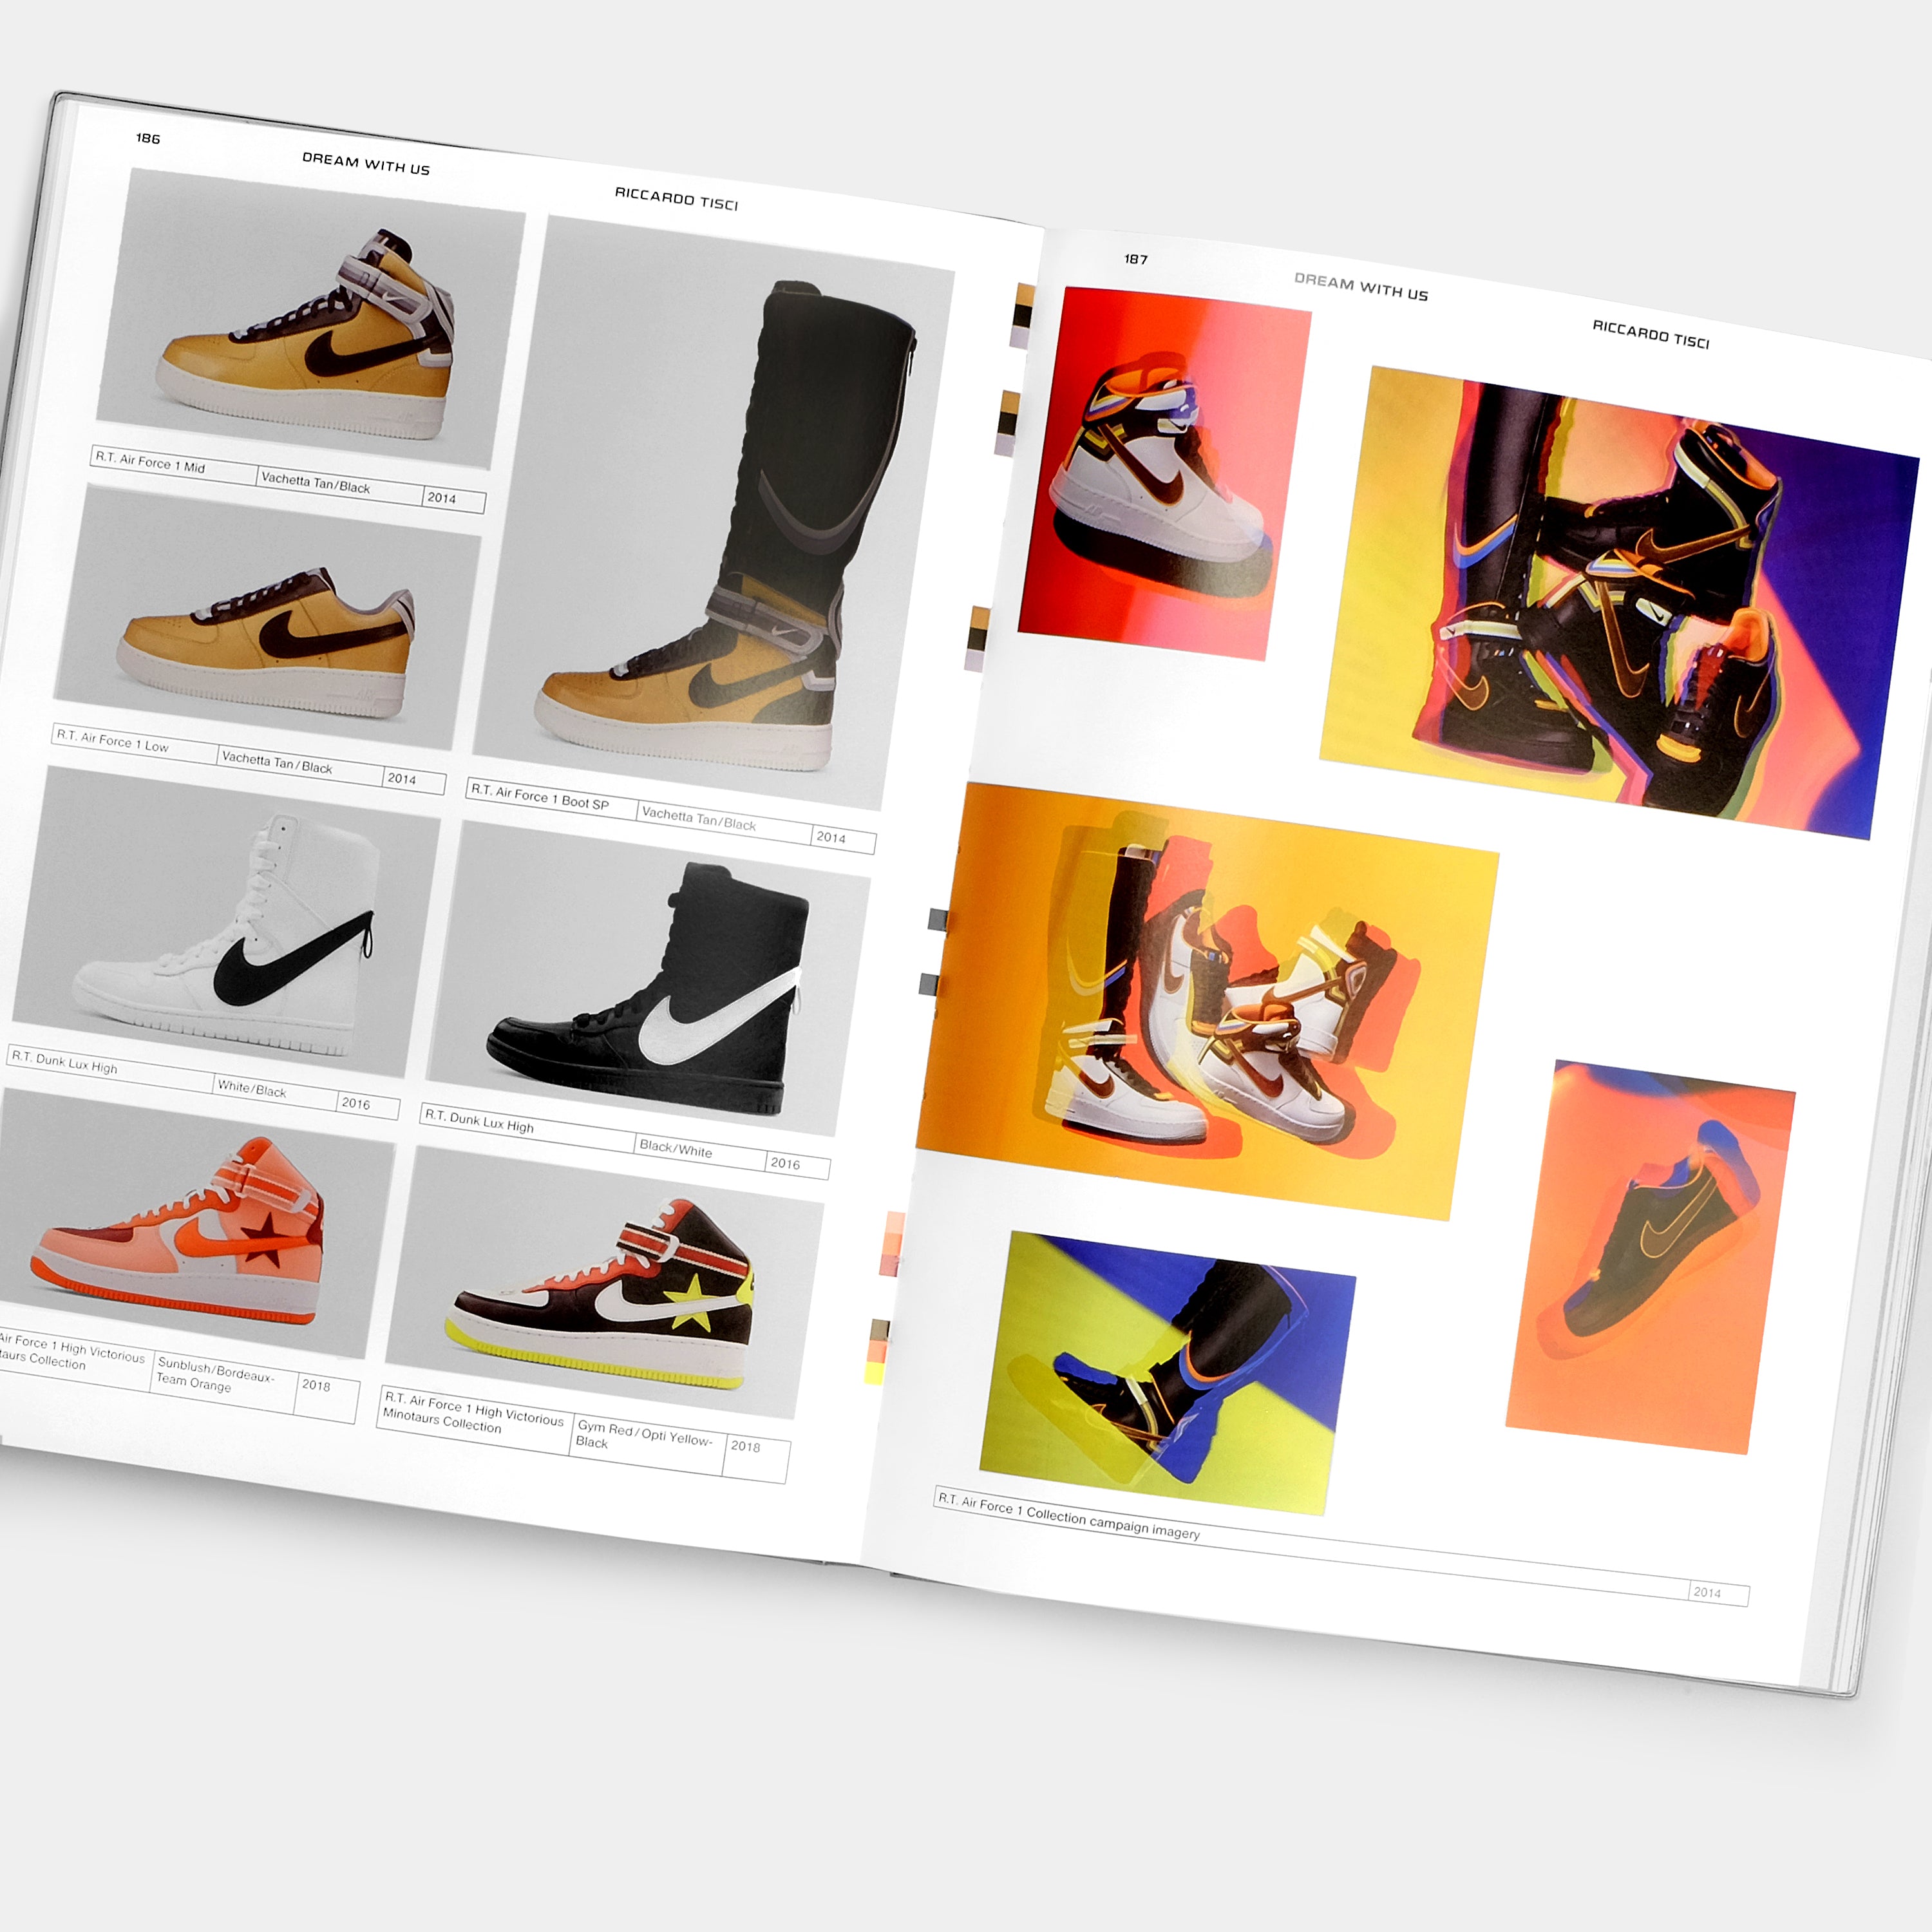 Nike: Better is Temporary by Sam Grawe Phaidon Book